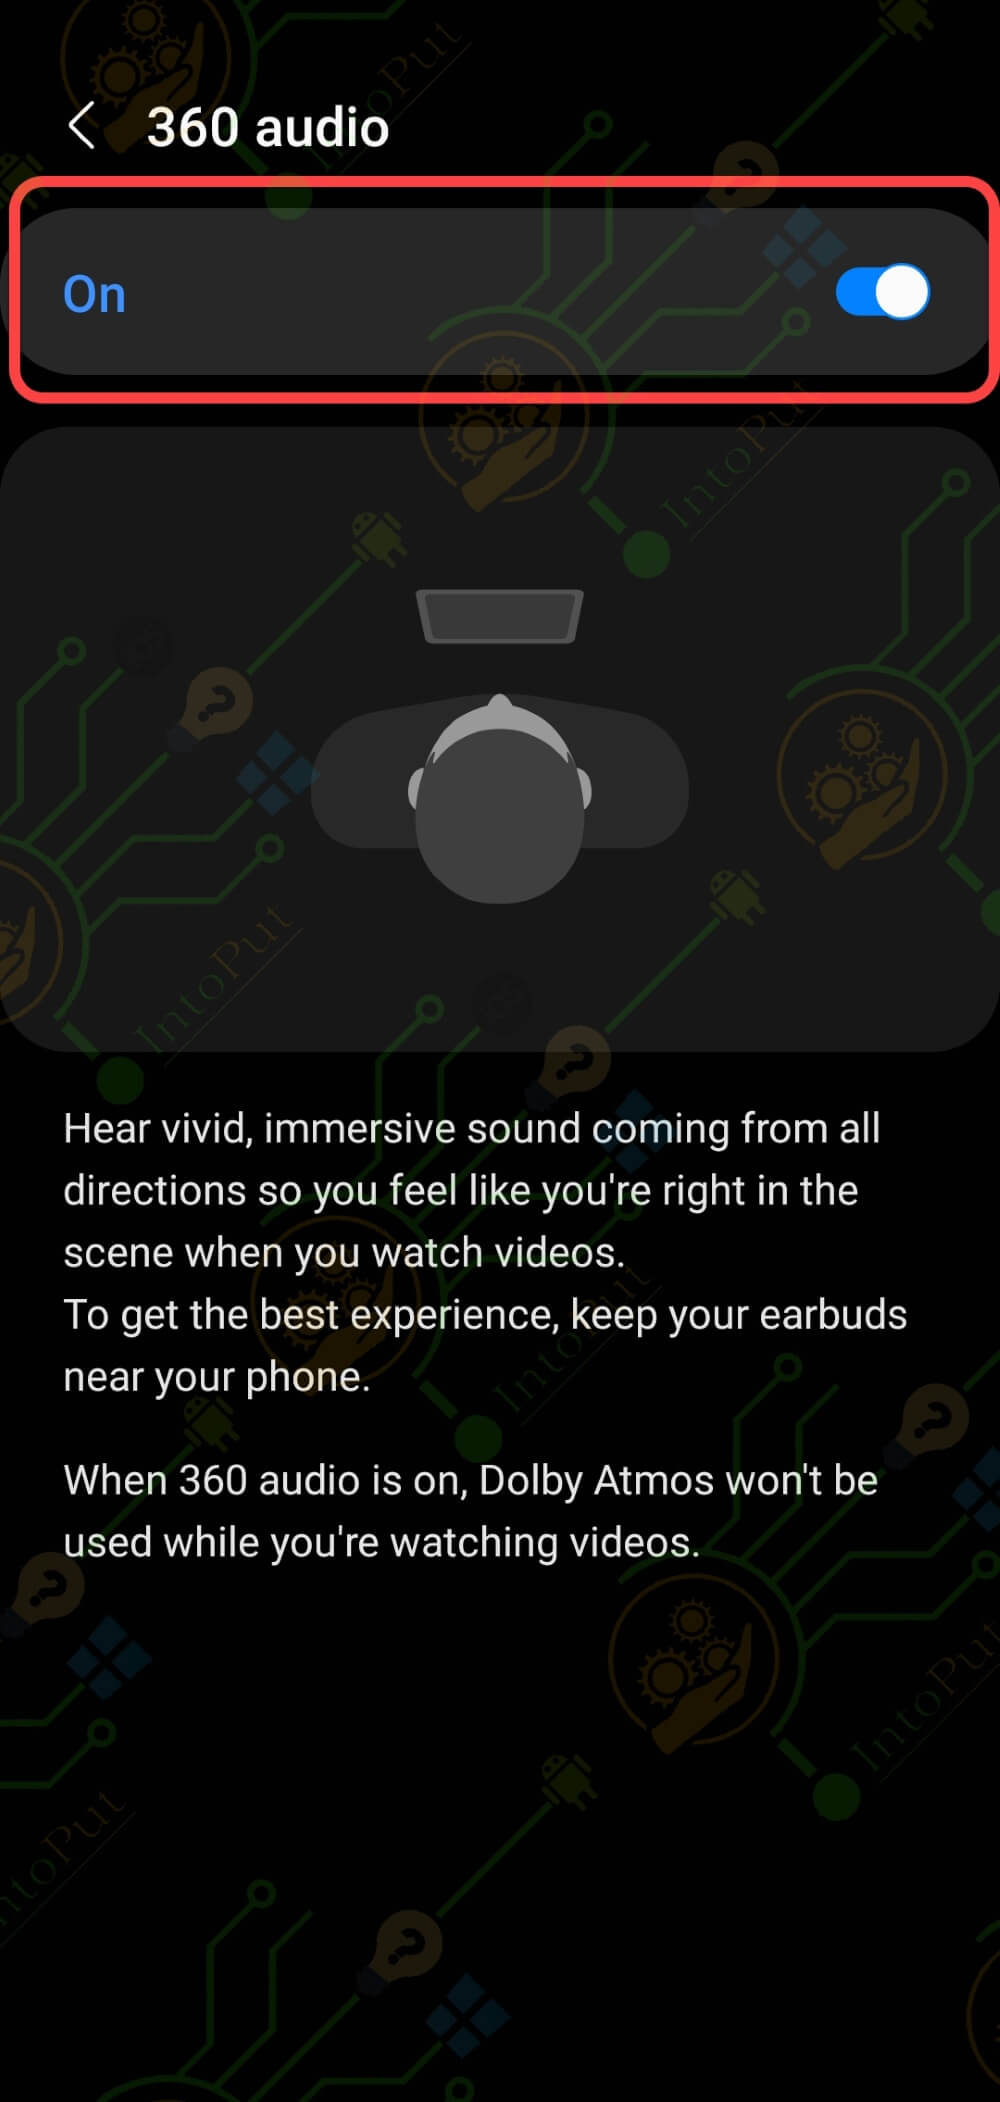 How to Enable 360 Audio on Samsung Buds Live, Buds Pro, Buds 2